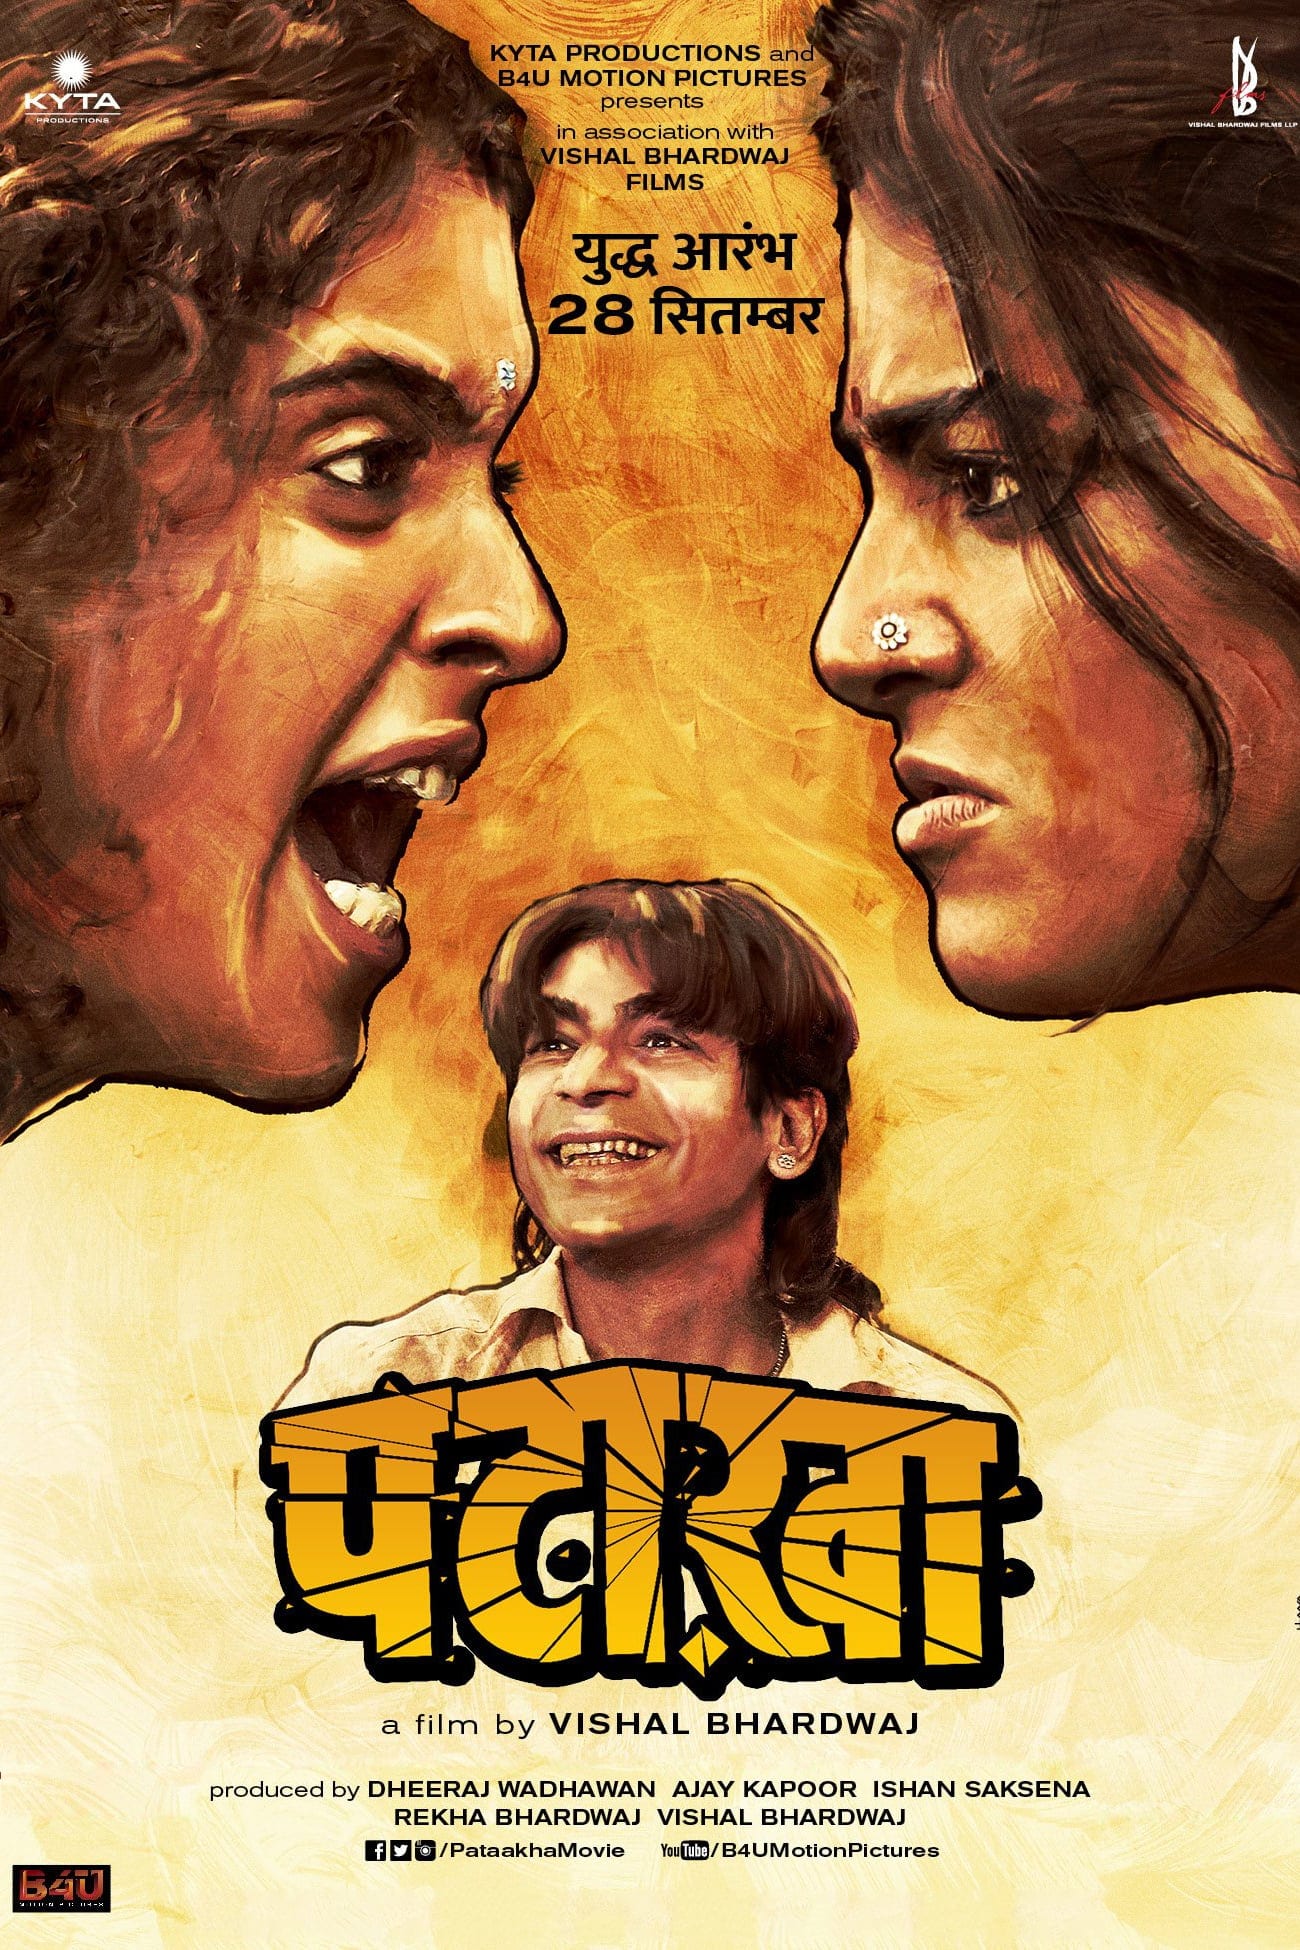 Poster for the movie "Pataakha"